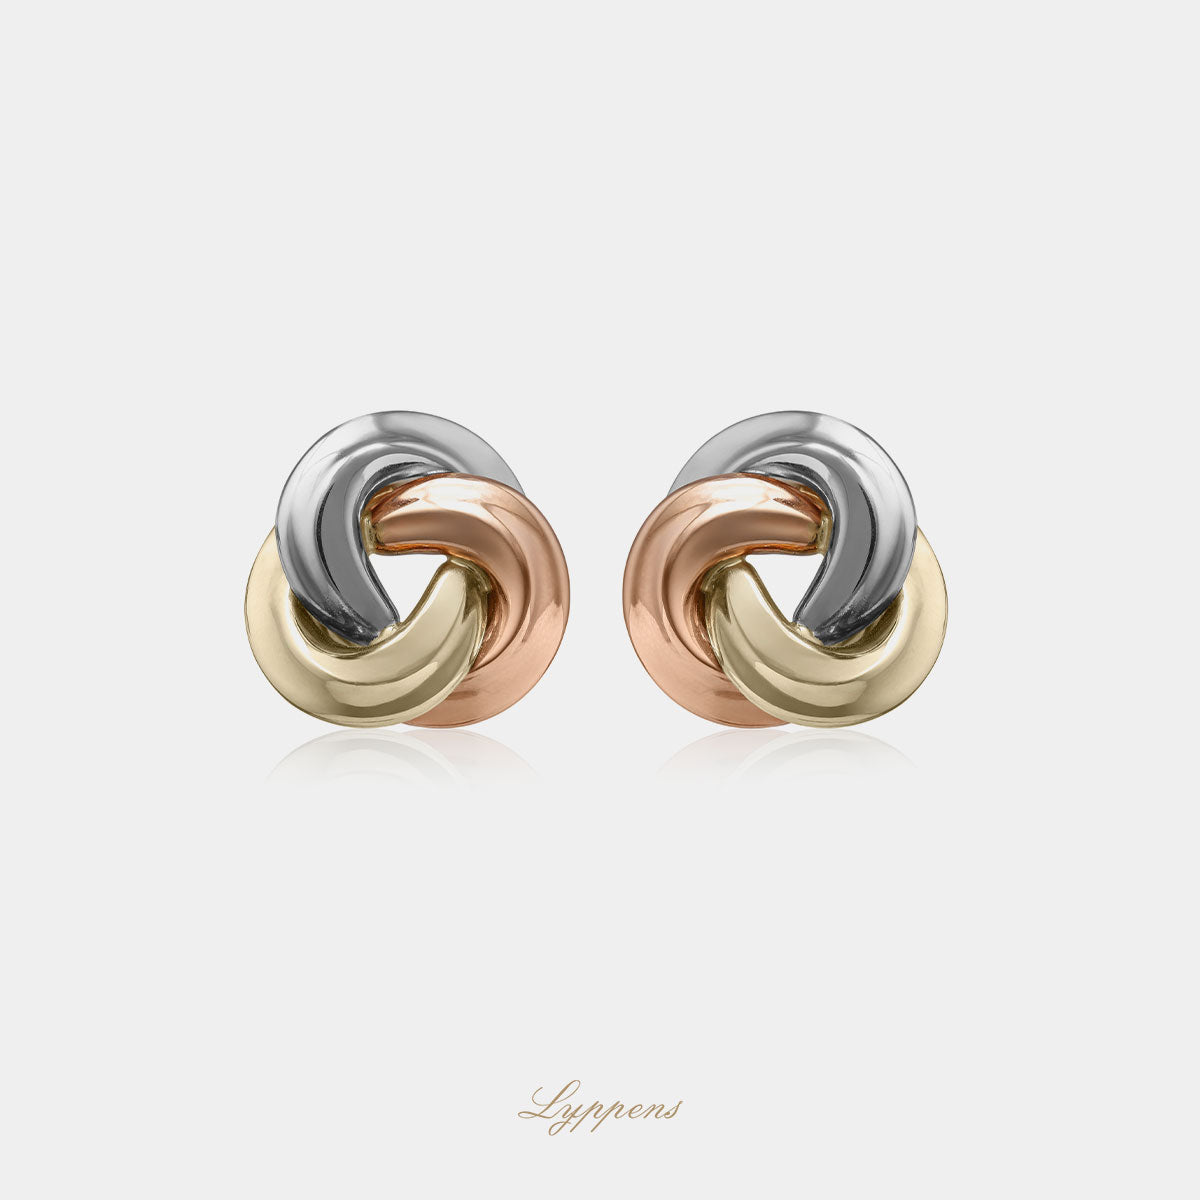 Yellow, white and rose gold vintage ear studs